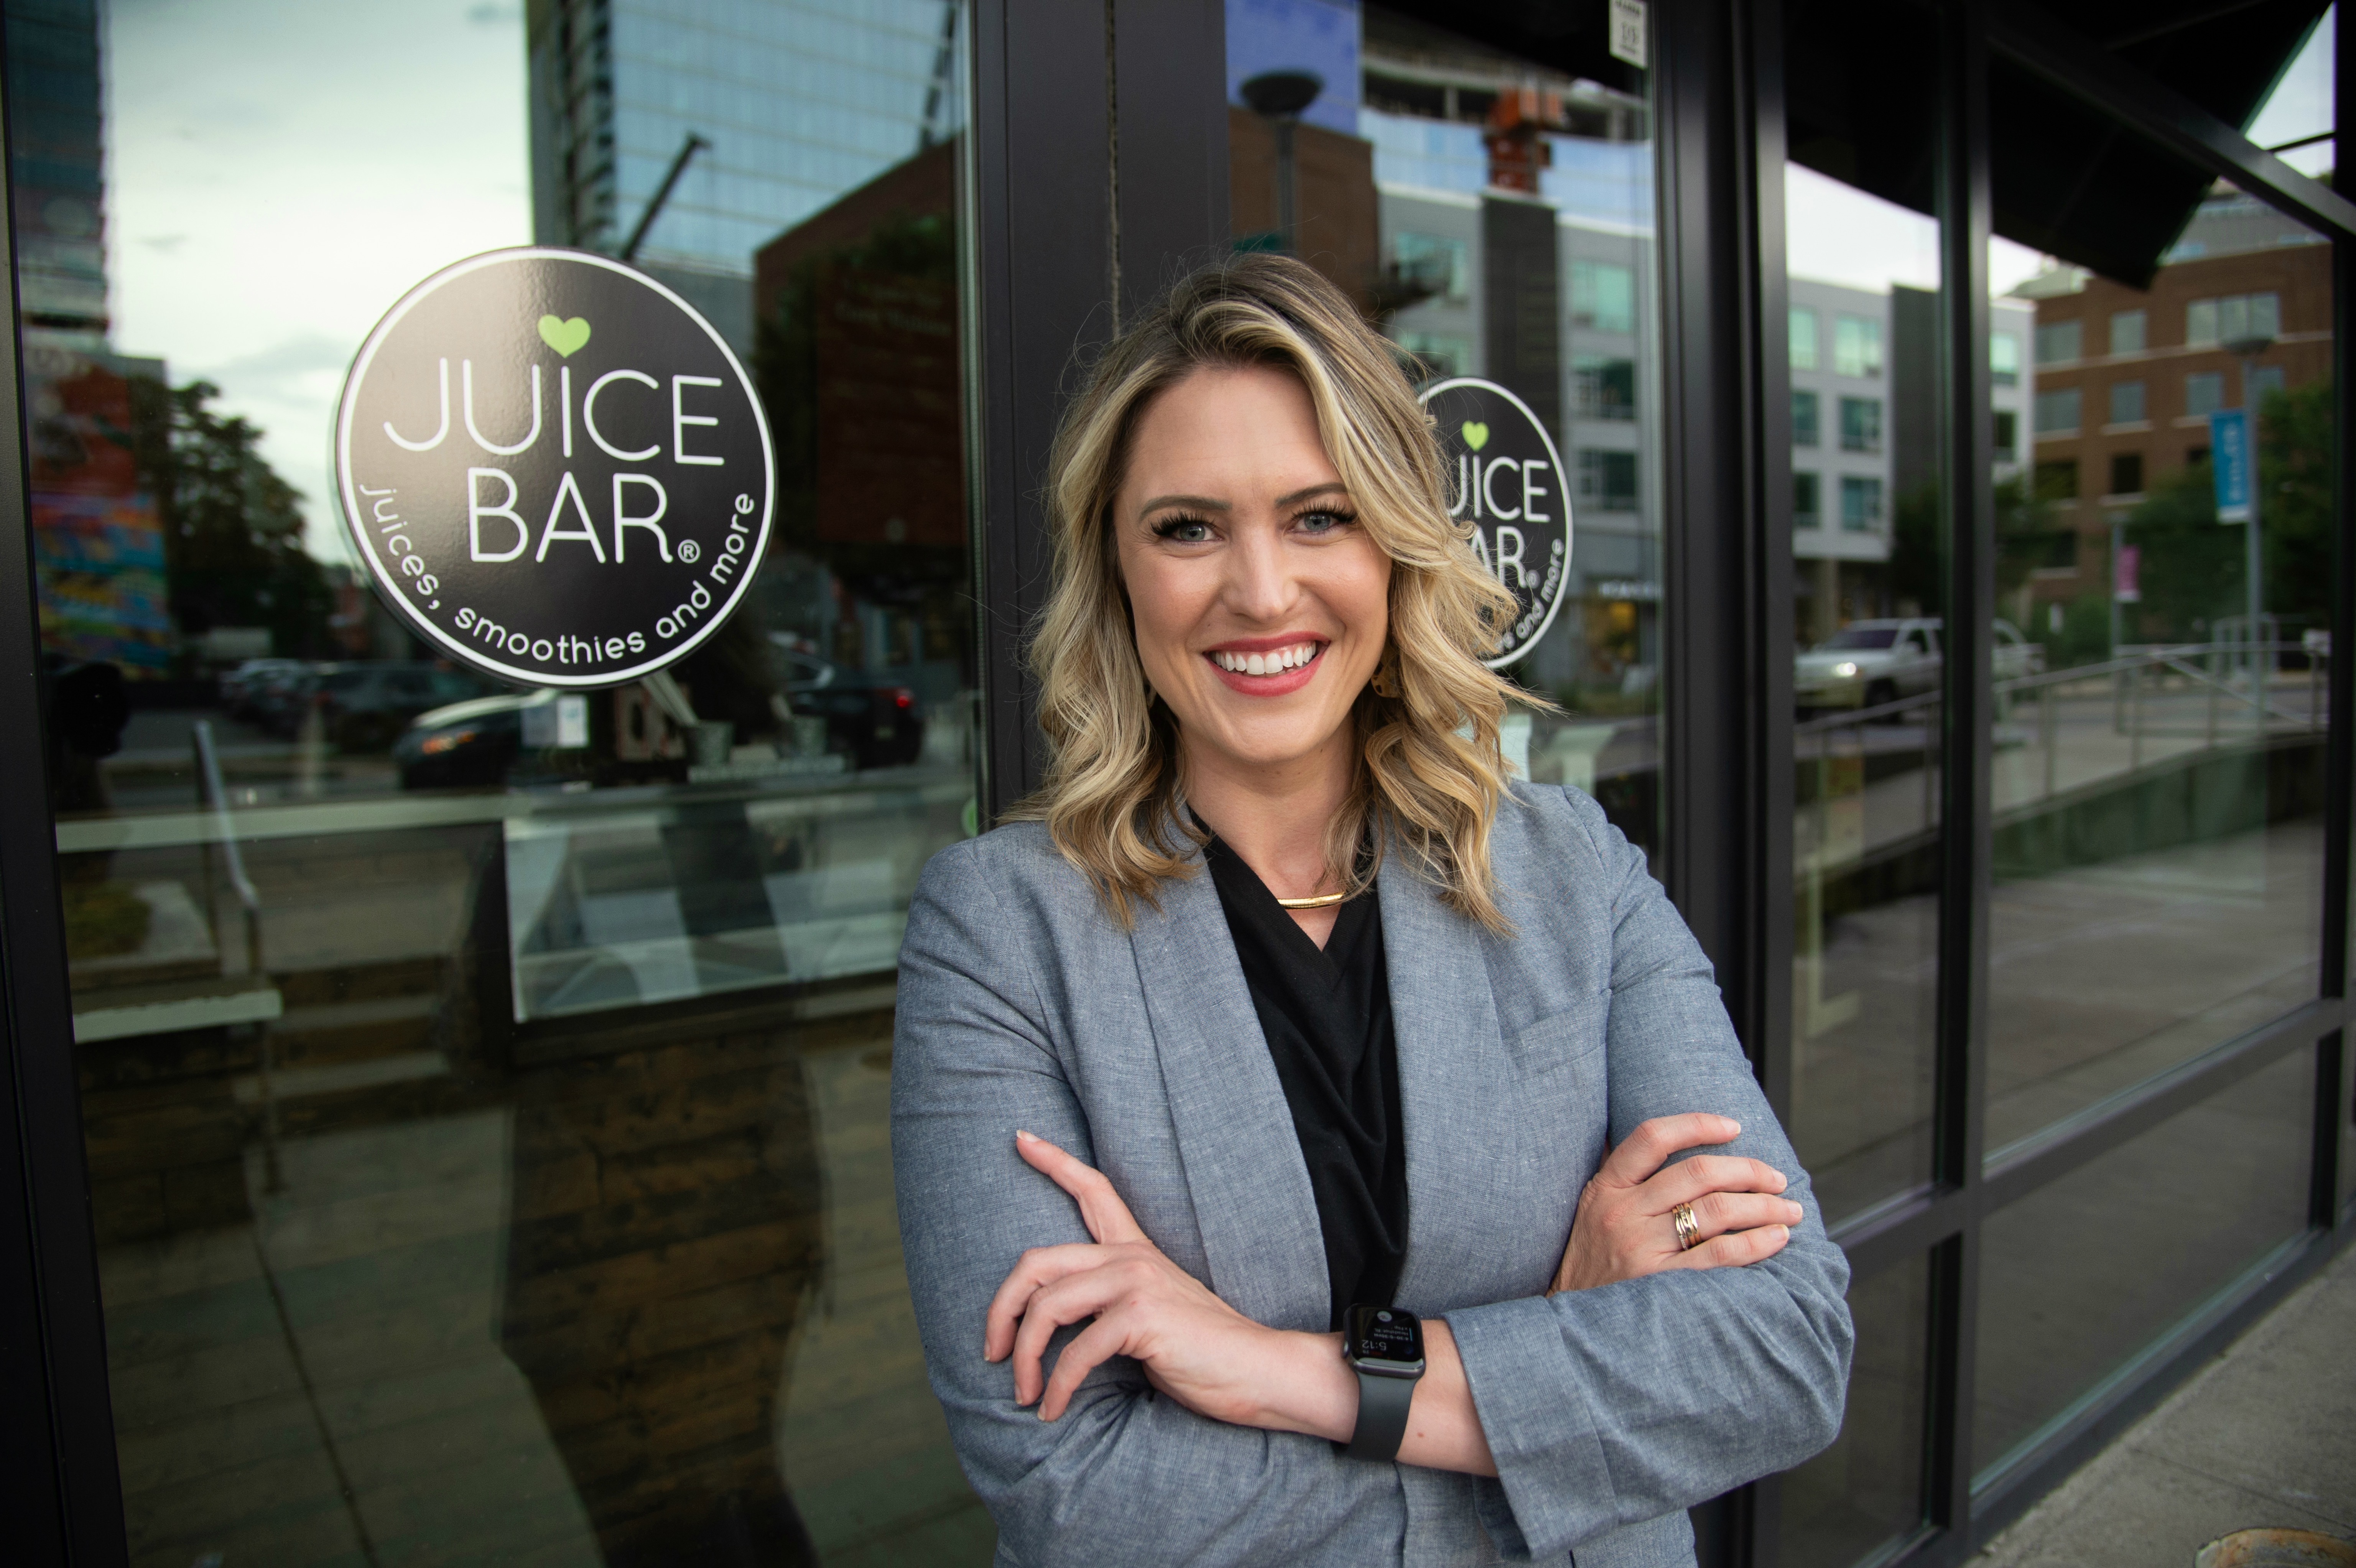 I Love Juice Bar” Concept From Fresh Hospitality Names Rachel Layton  Managing Partner | Business Wire